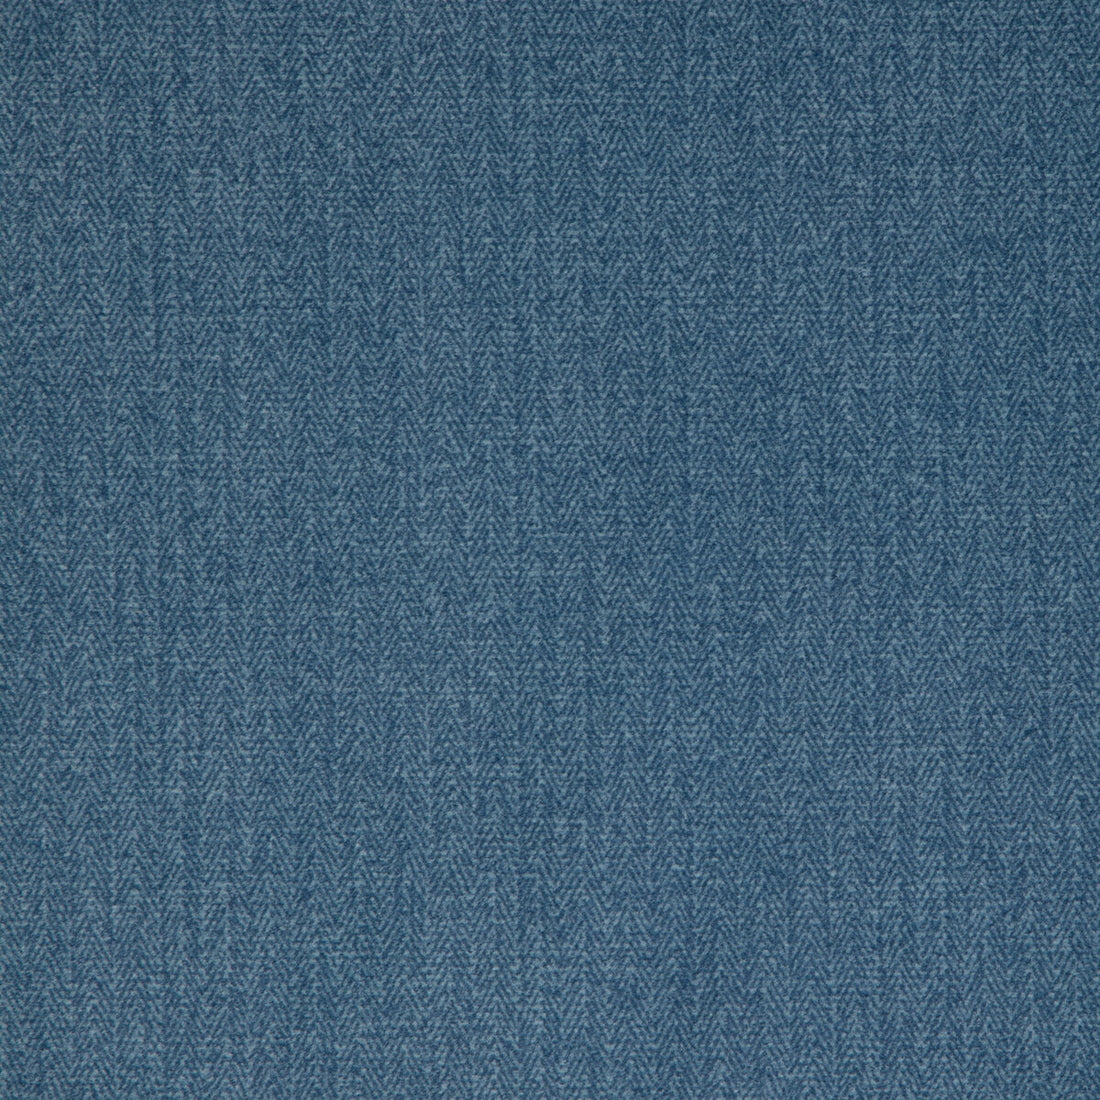 Kravet Design fabric in twill-275672 color - pattern TWILL.2756-72.0 - by Kravet Design in the Performance collection